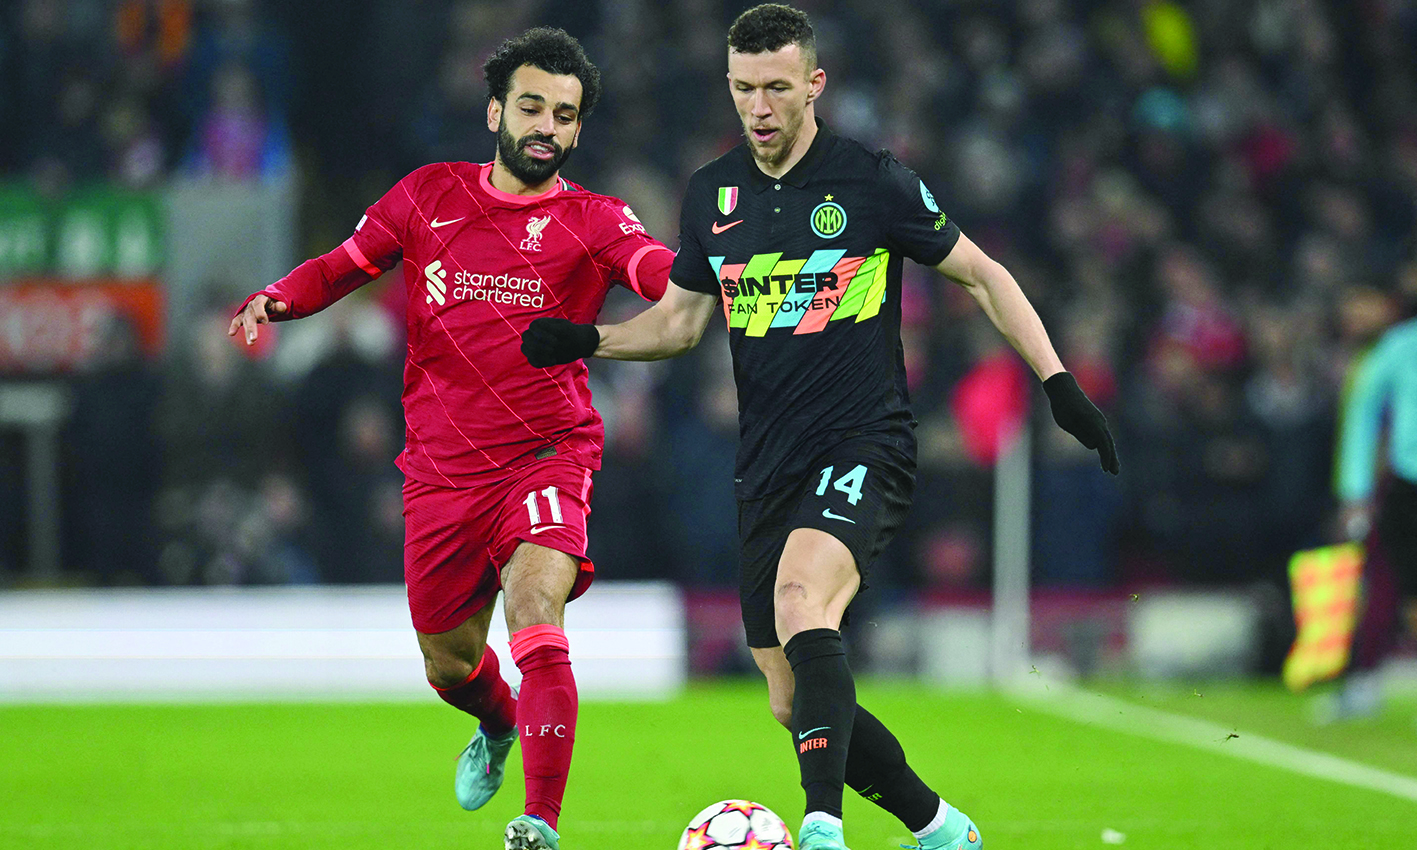 LIVERPOOL: Inter Milan's Croatian midfielder Ivan Perisic vies with Liverpool's Egyptian midfielder Mohamed Salah during the UEFA Champions League round of 16 second leg match at Anfield on Tuesday. - AFP n